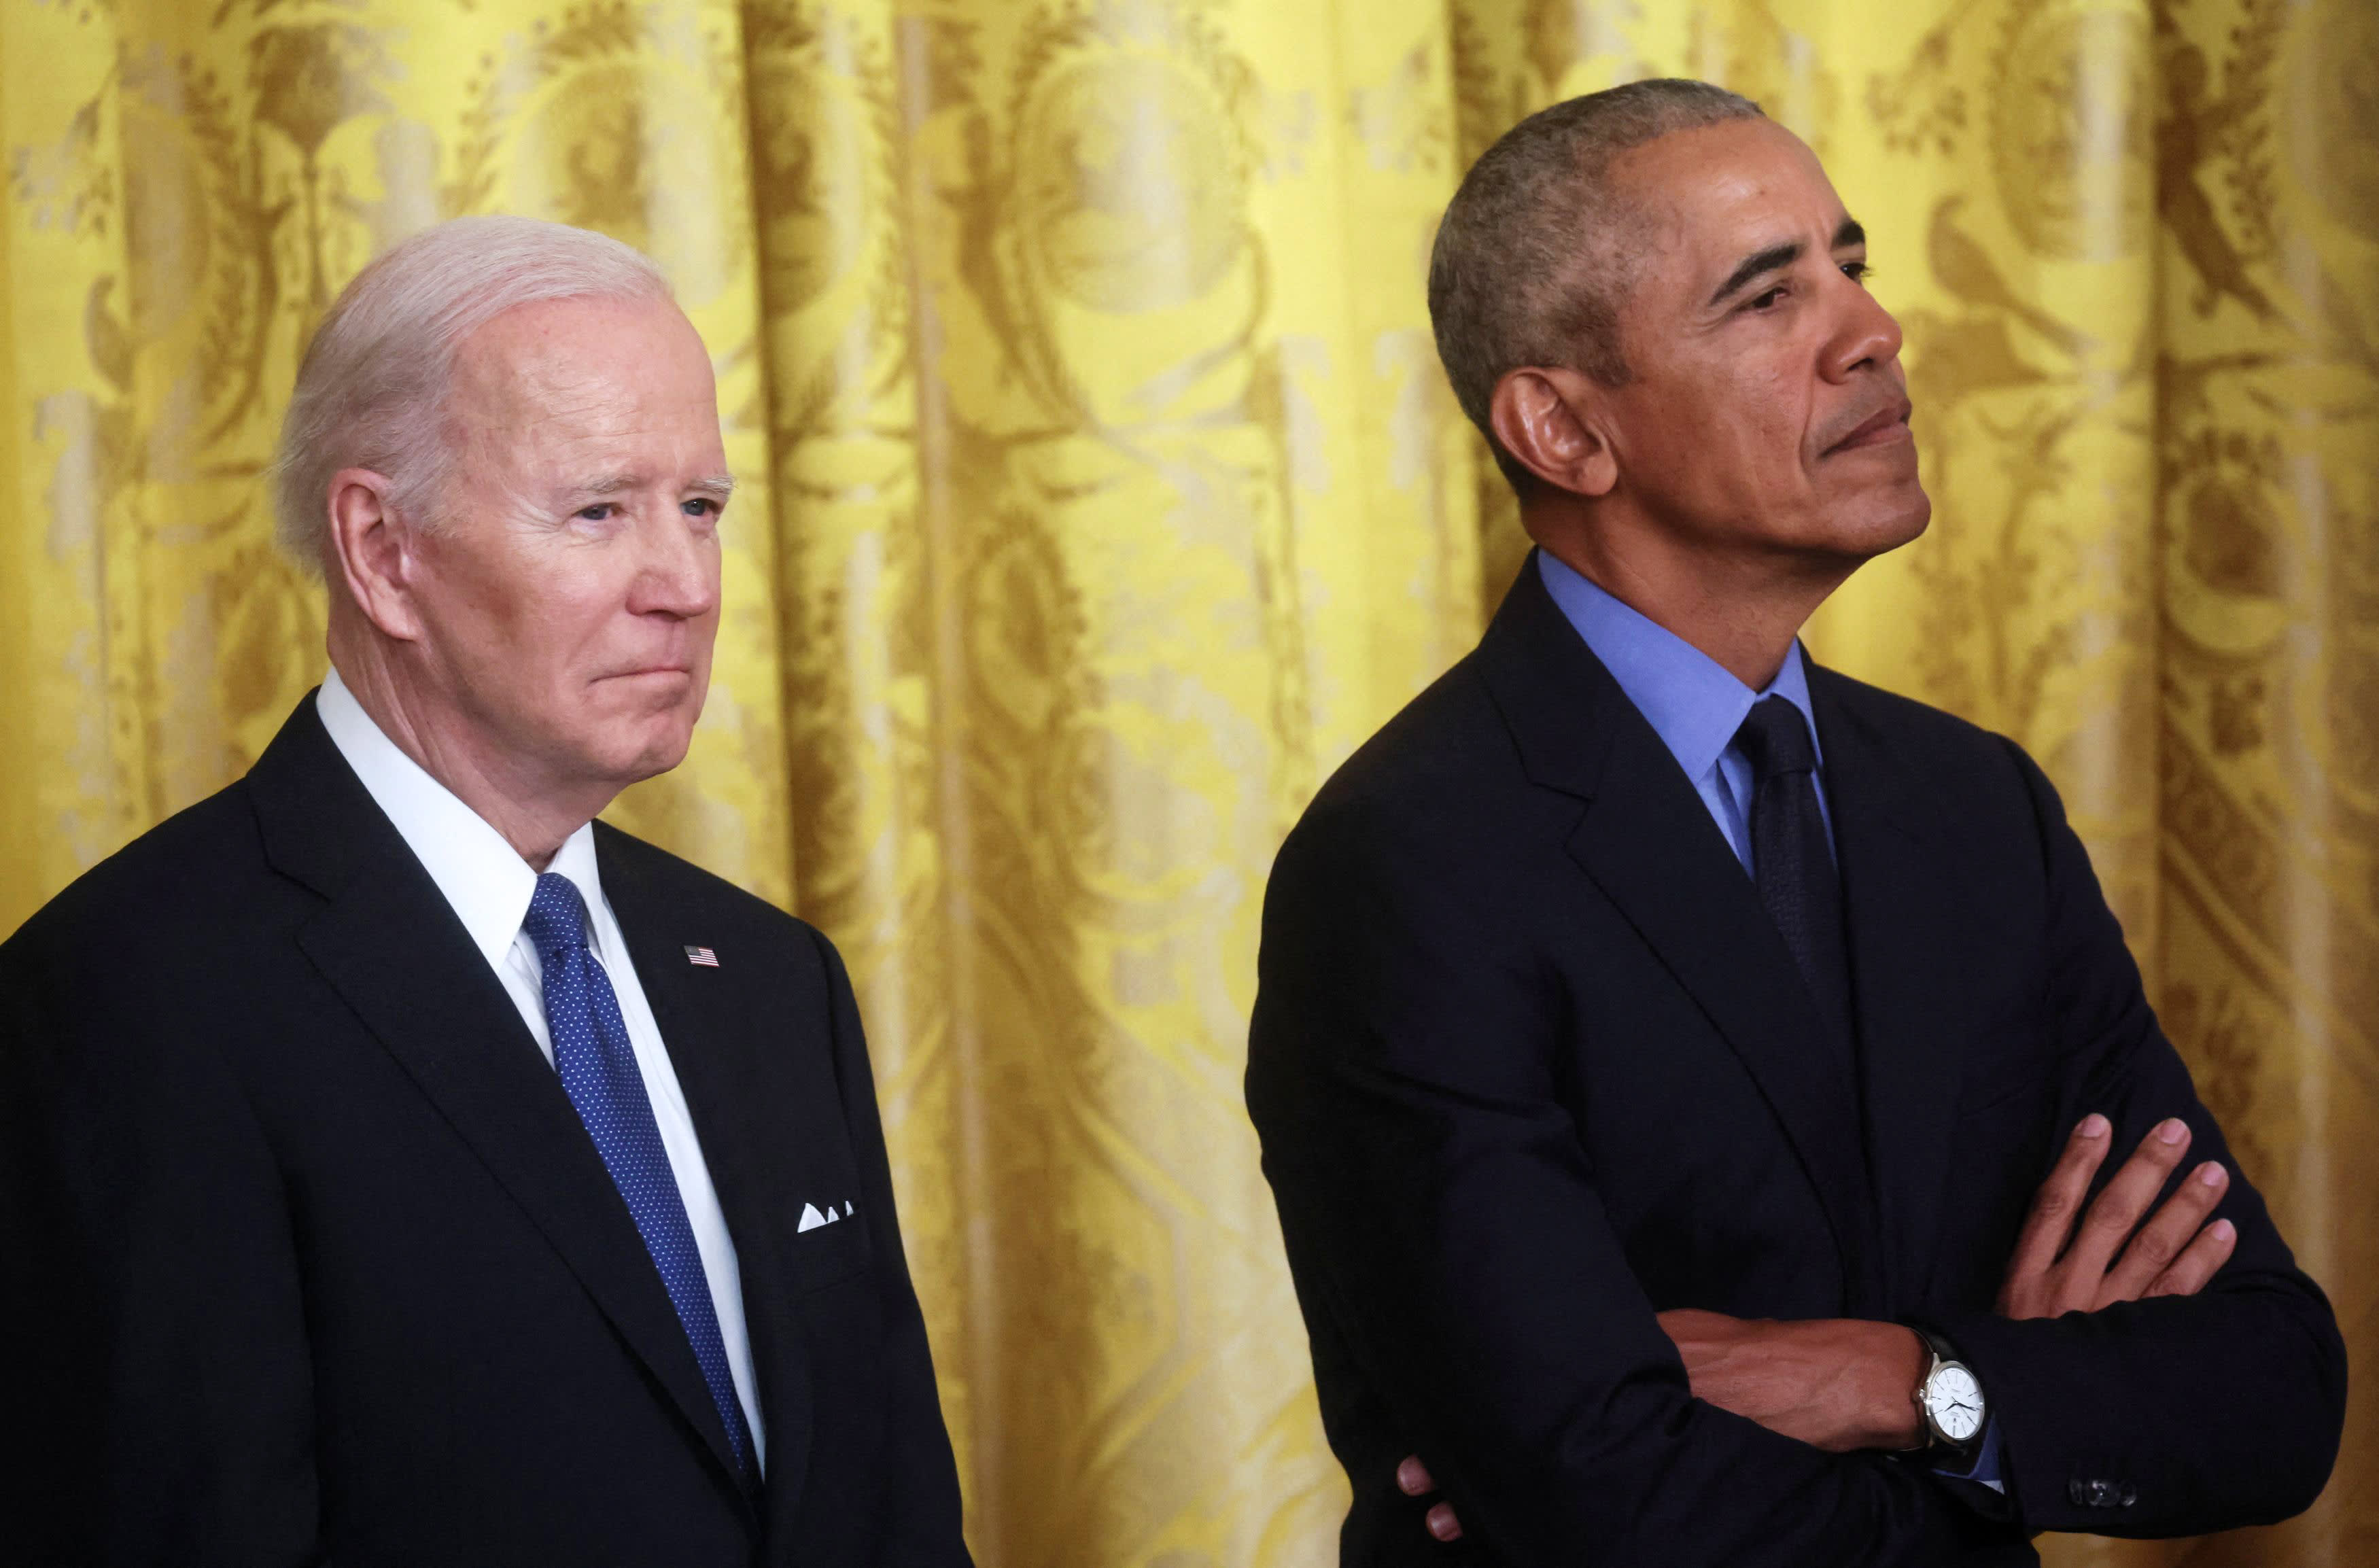 Obama boasted about opposing gas tax holiday, but Biden now wants one